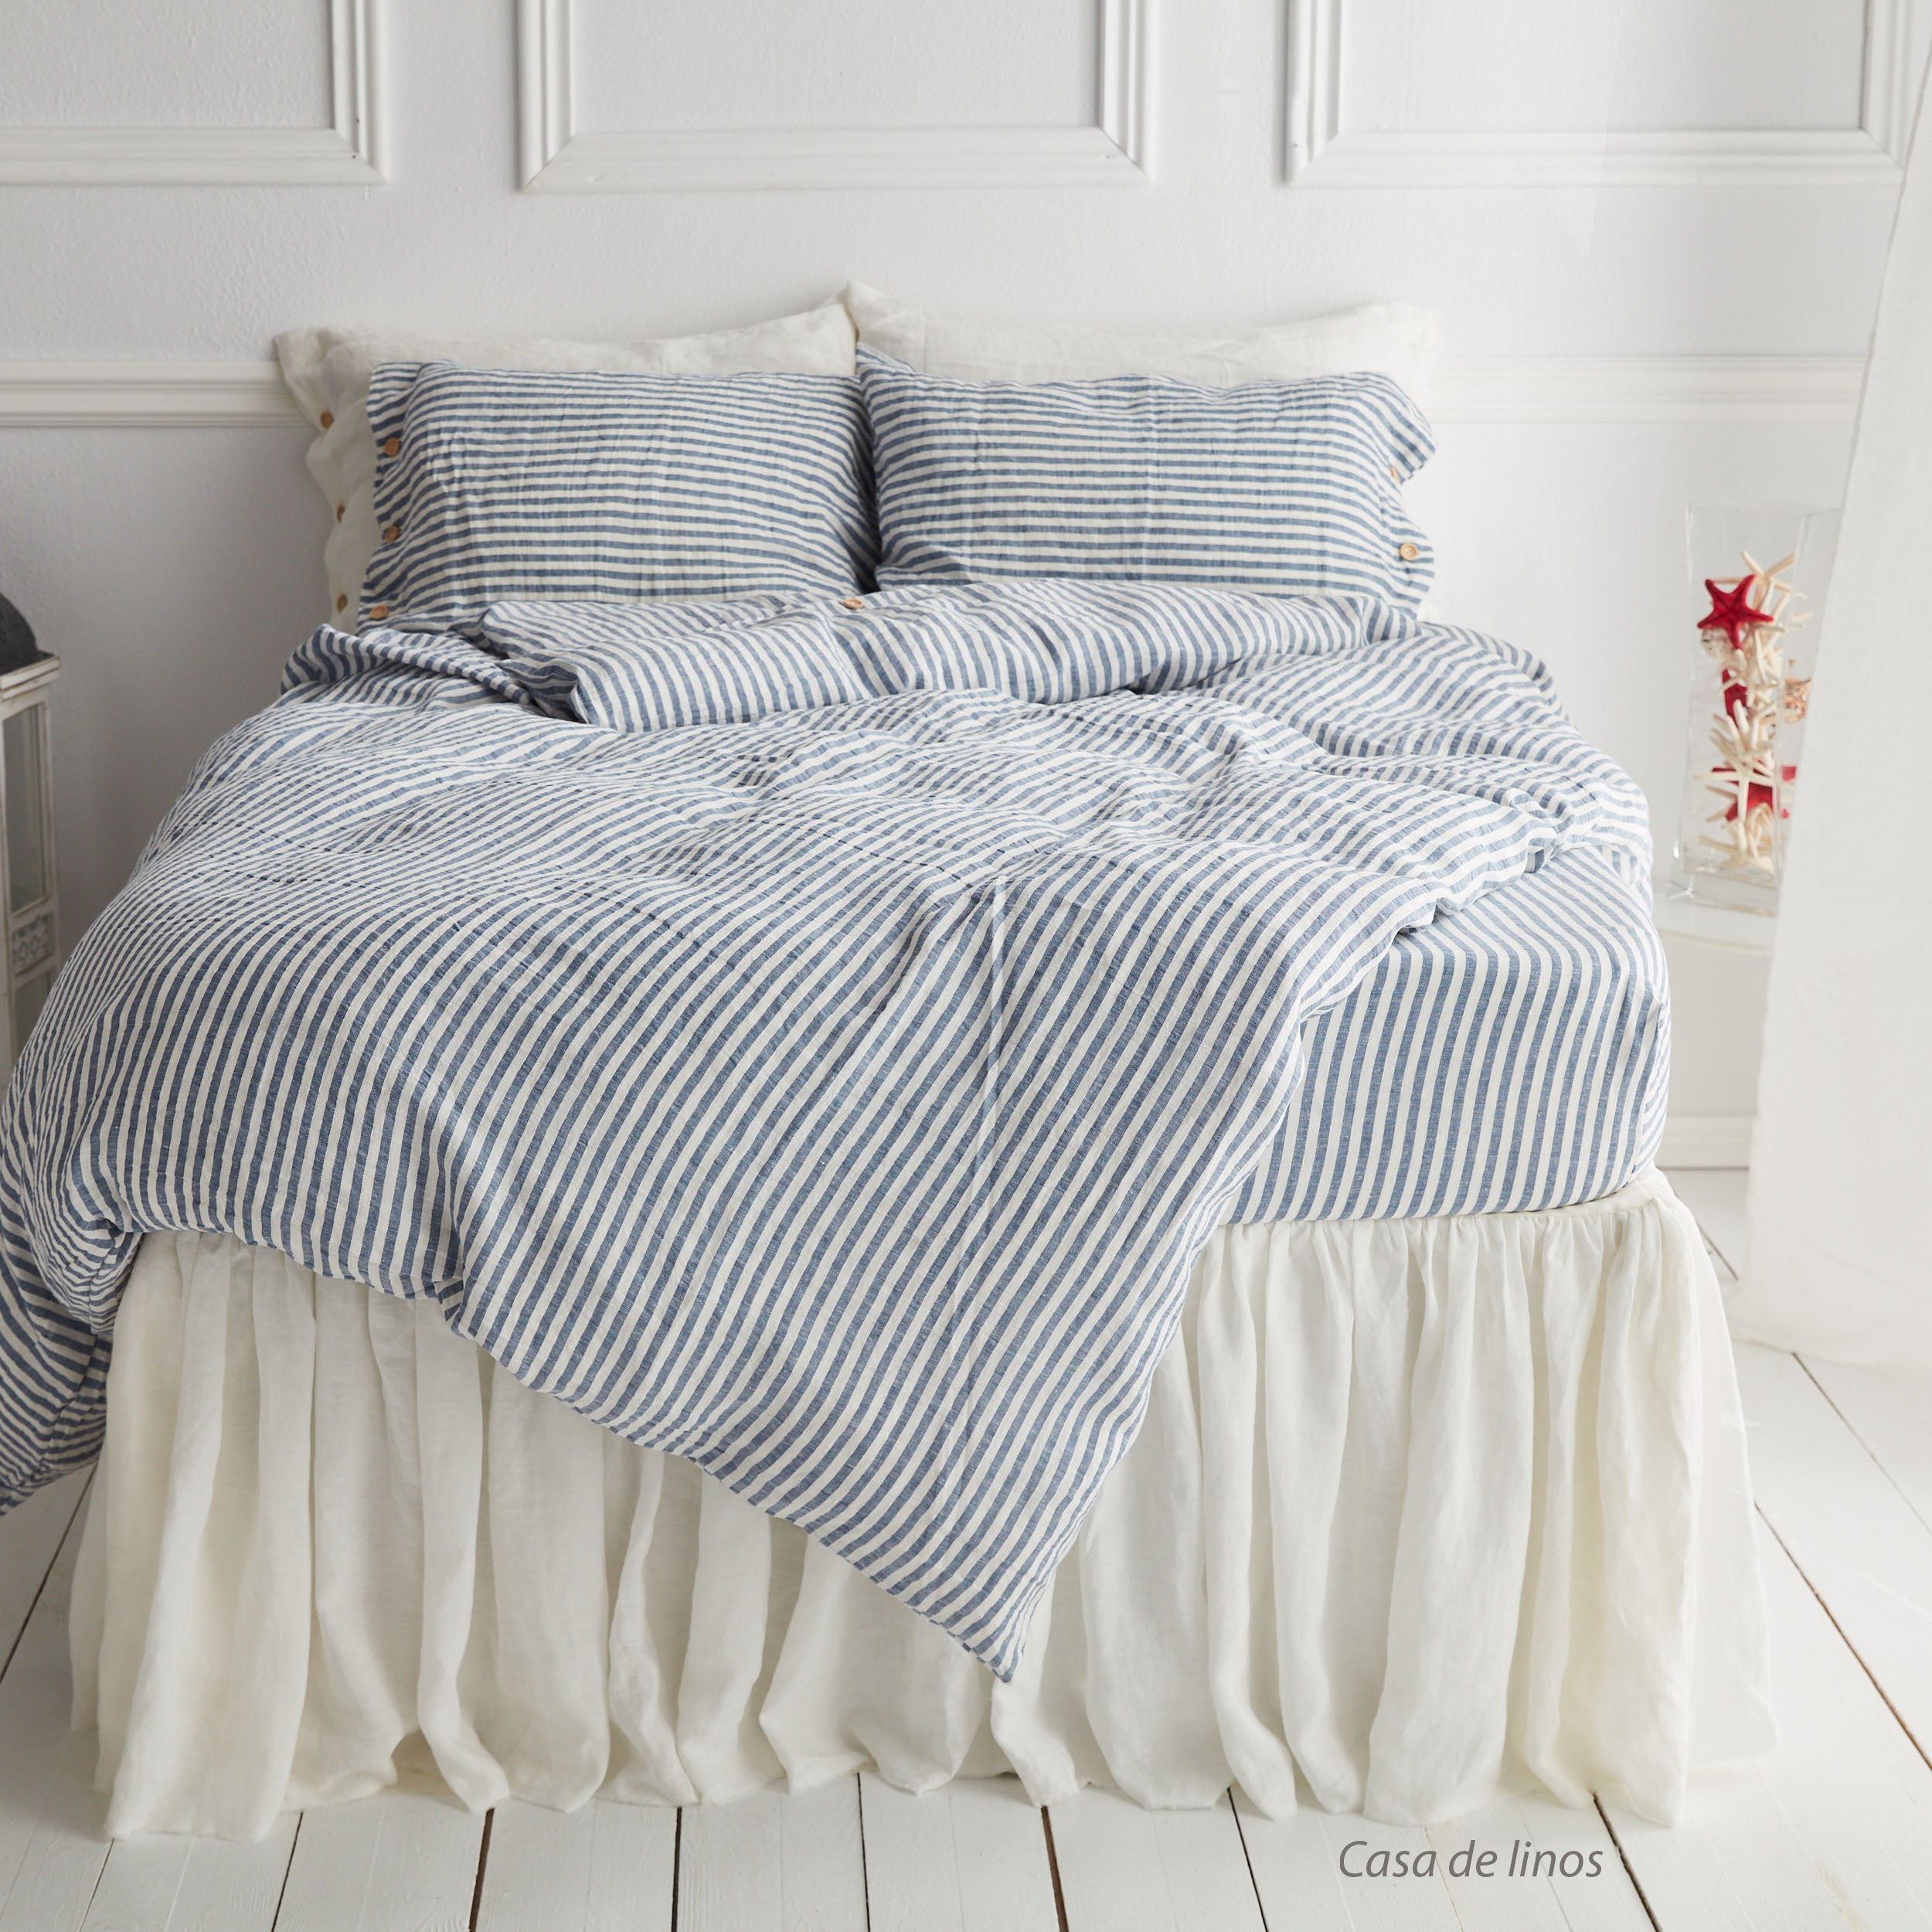 Striped Duvet Cover in Blue Color, Washed, Softened Linen Bedding